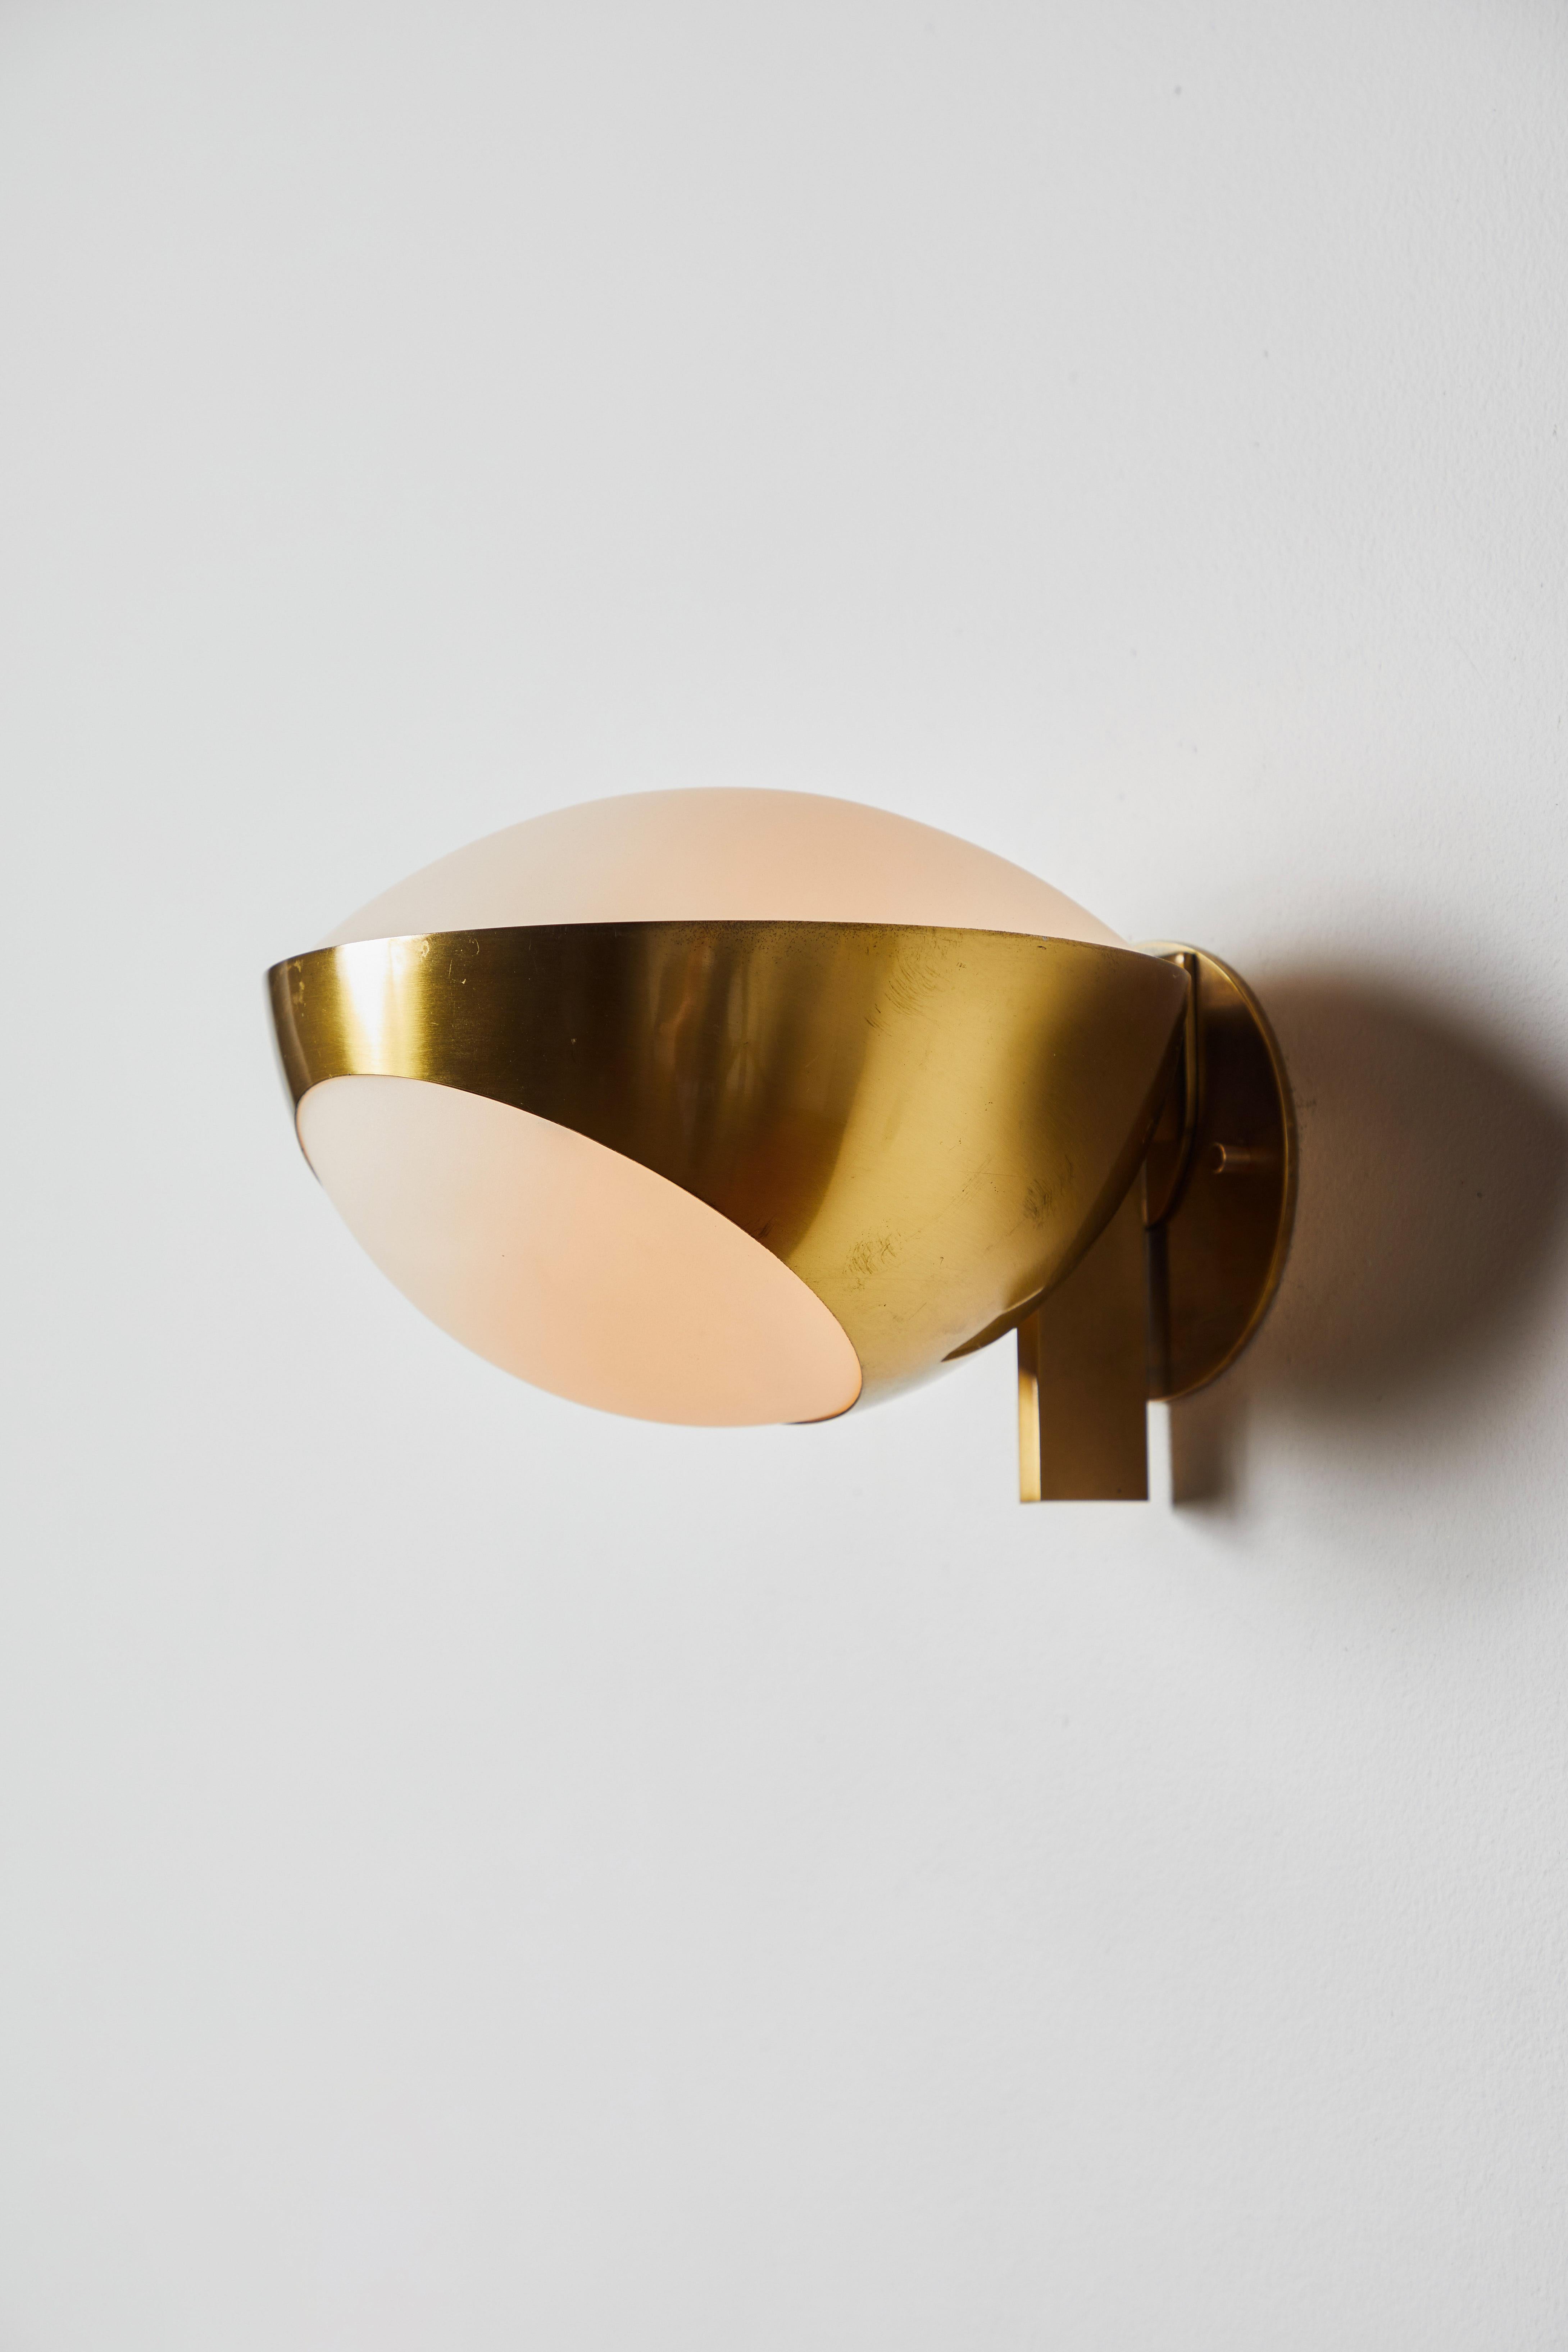 Mid-20th Century Model No. 1963 Sconce by Max Ingrand for Fontanta Arte